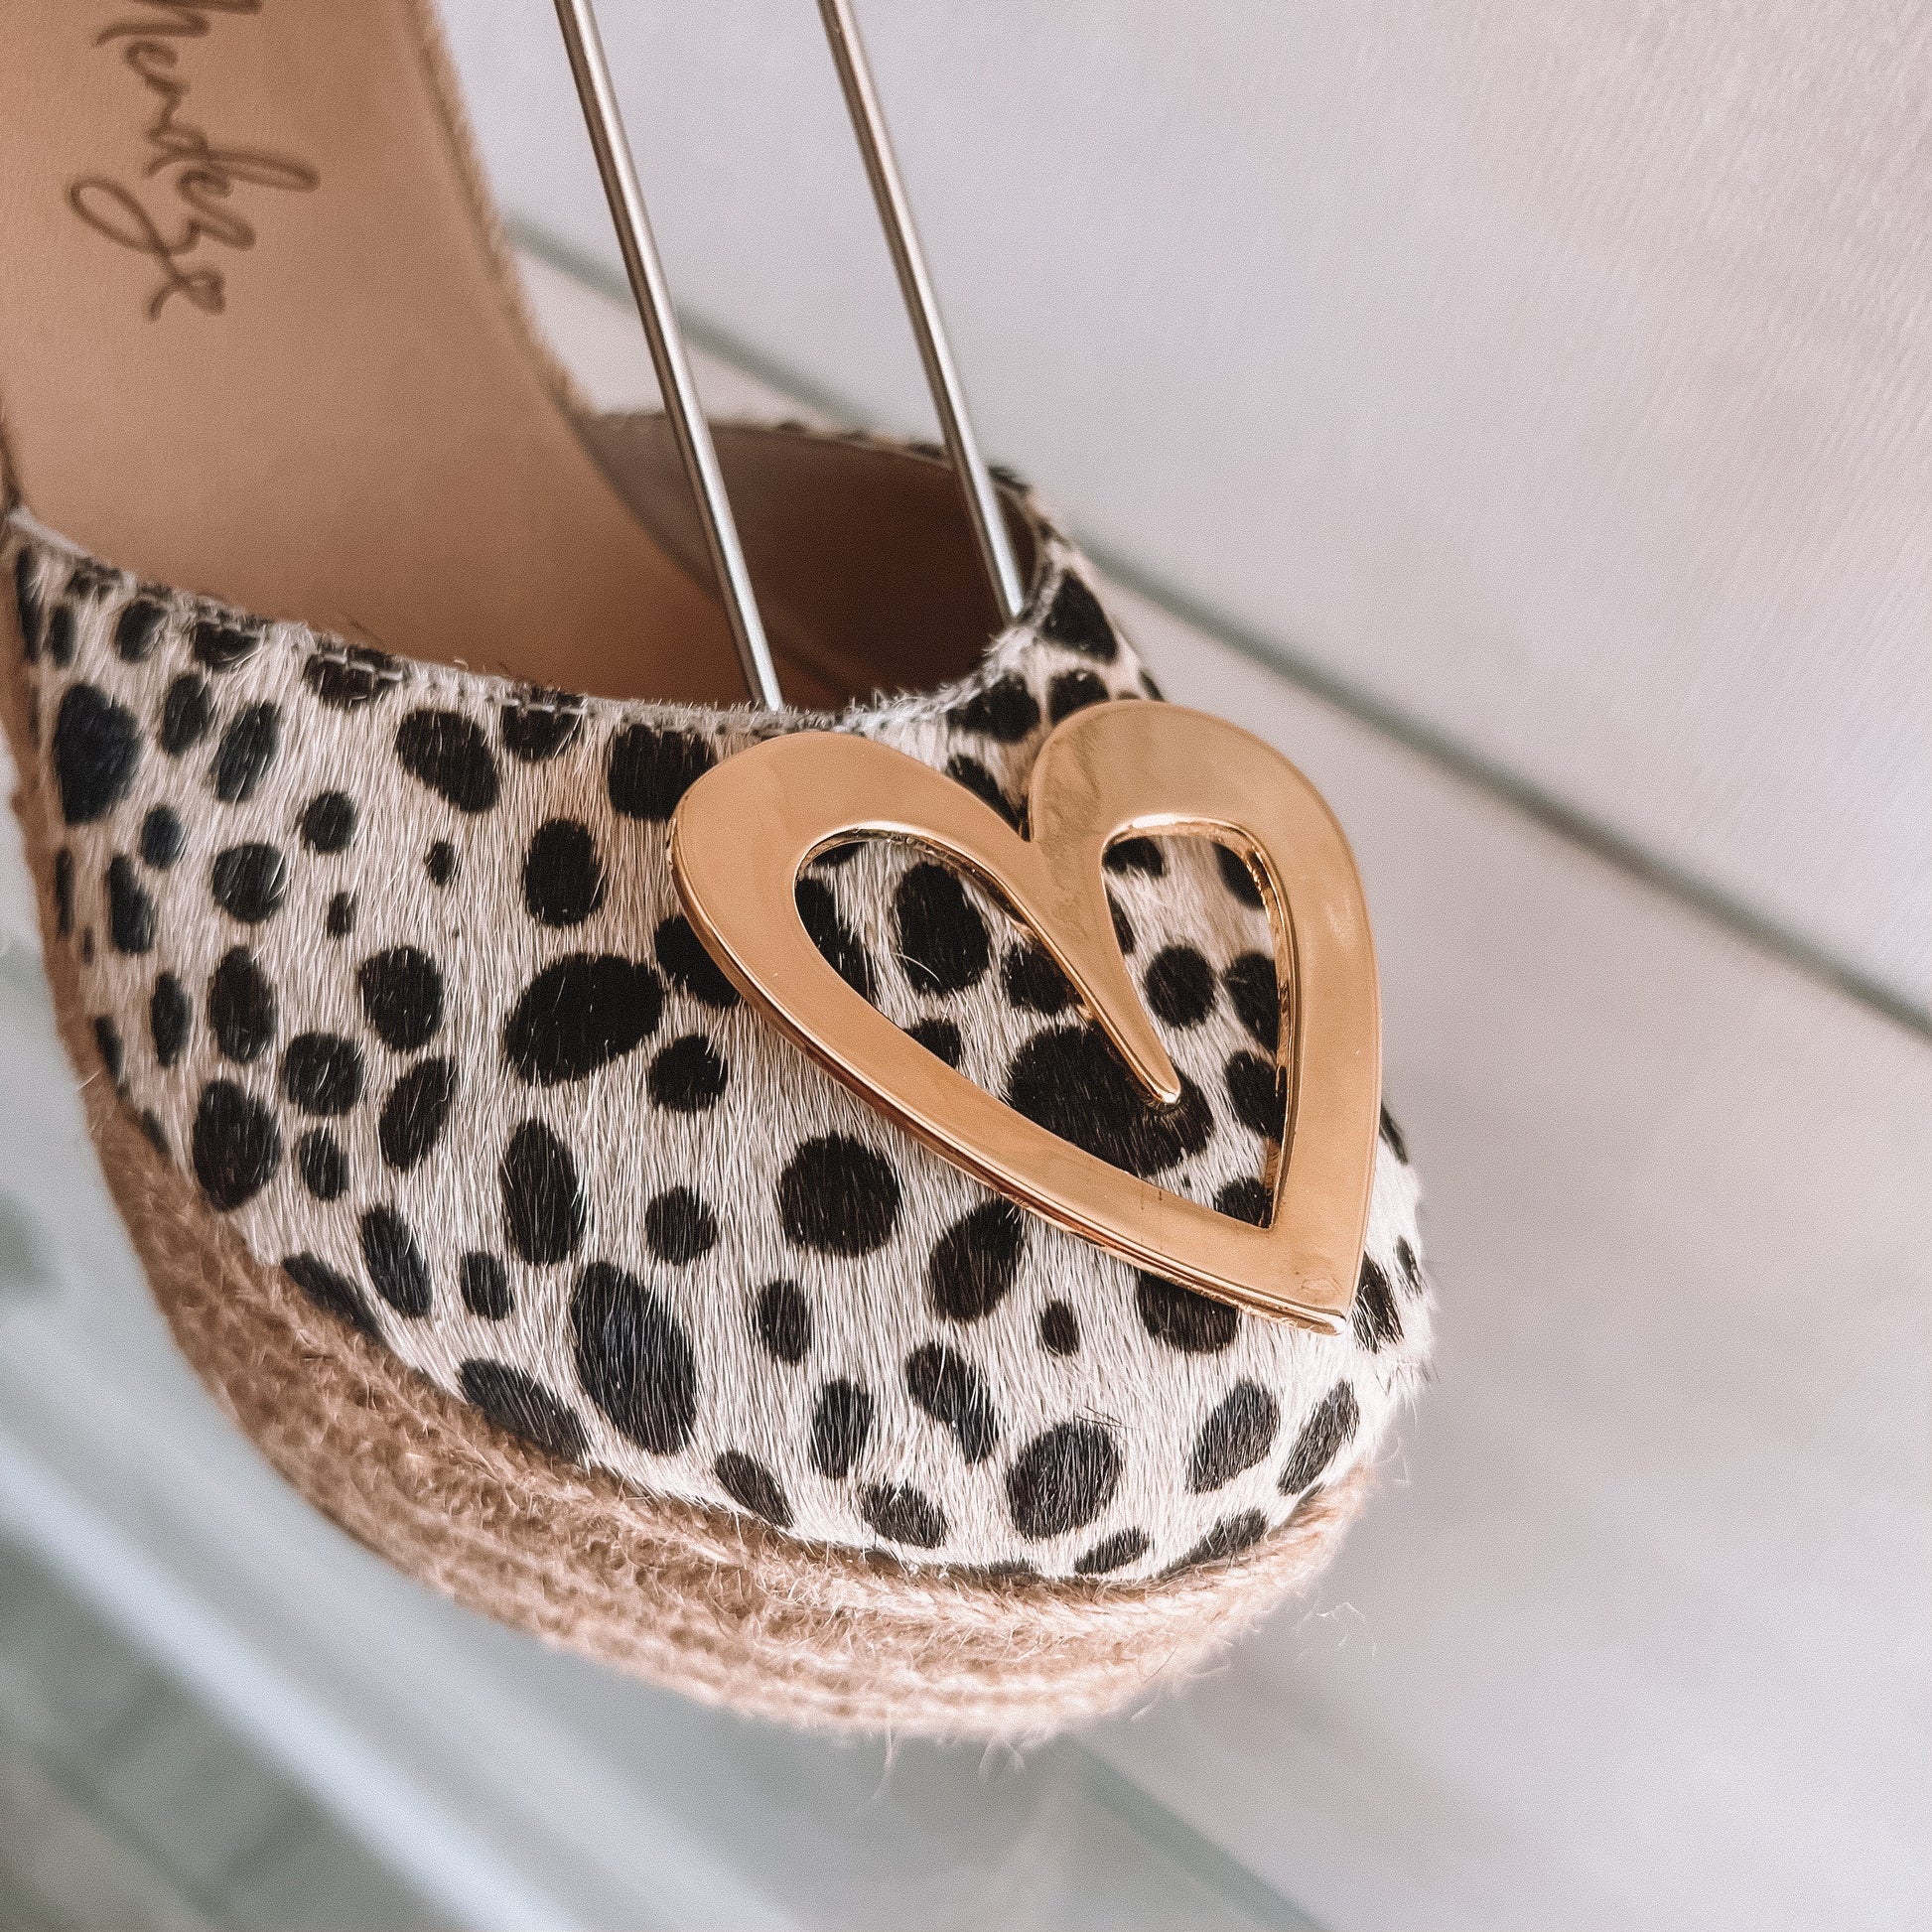 Love Leopard by Nataly Mendez Natural jute base Genuine leather upper Genuine leather insole. 100% made in Colombia! 4 inch heel height 1.75 inch platform Comes with strap closure and beige hiladilla laces.